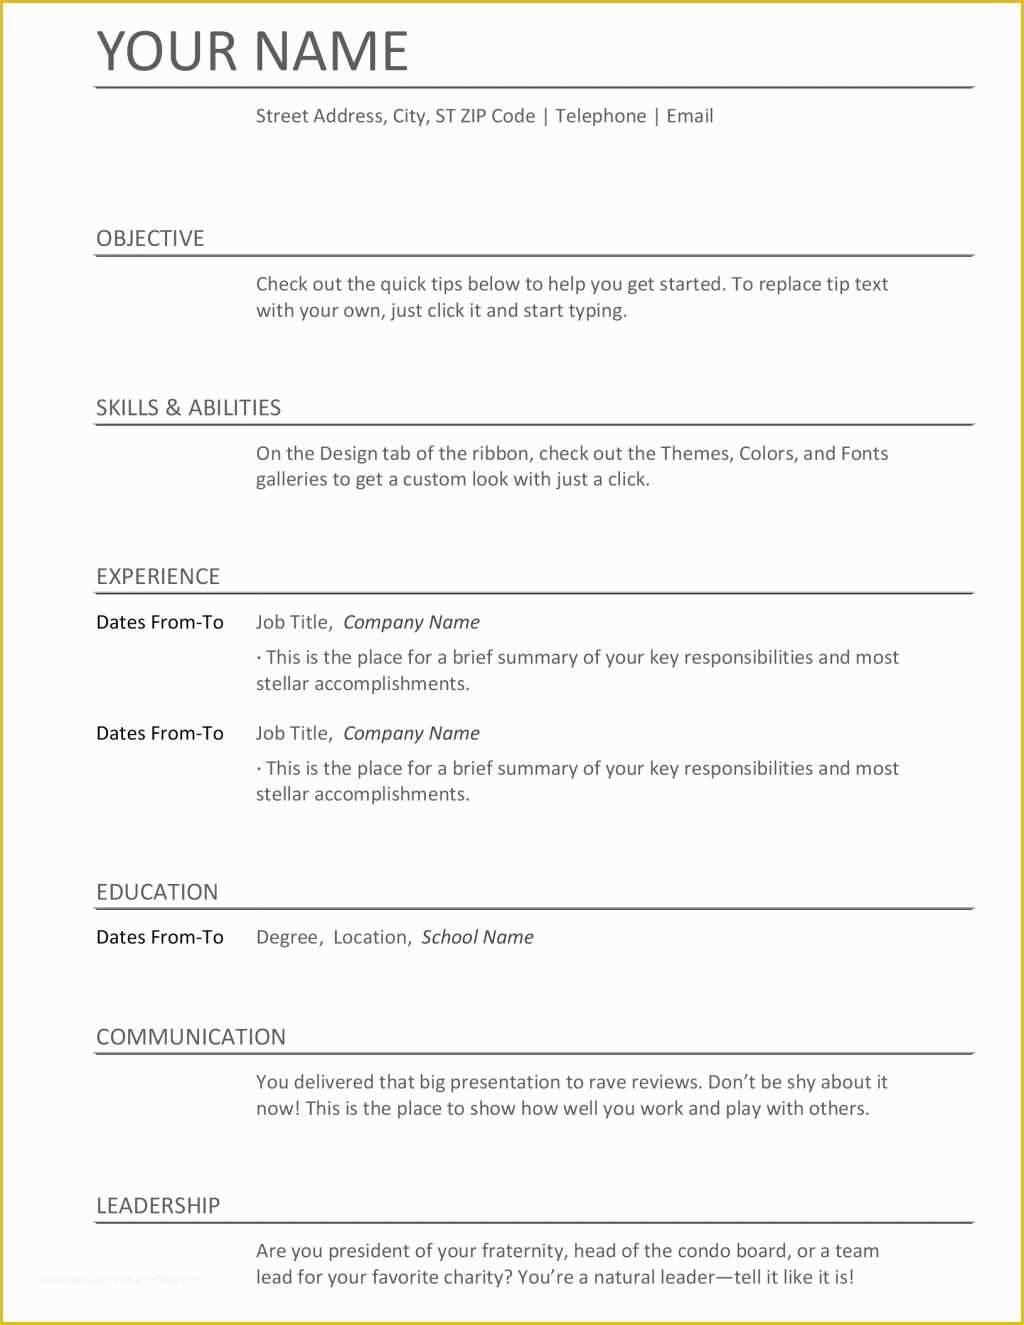 Word Document Resume Template Free Download Of Resume and Template 41 Word Document Resume Template